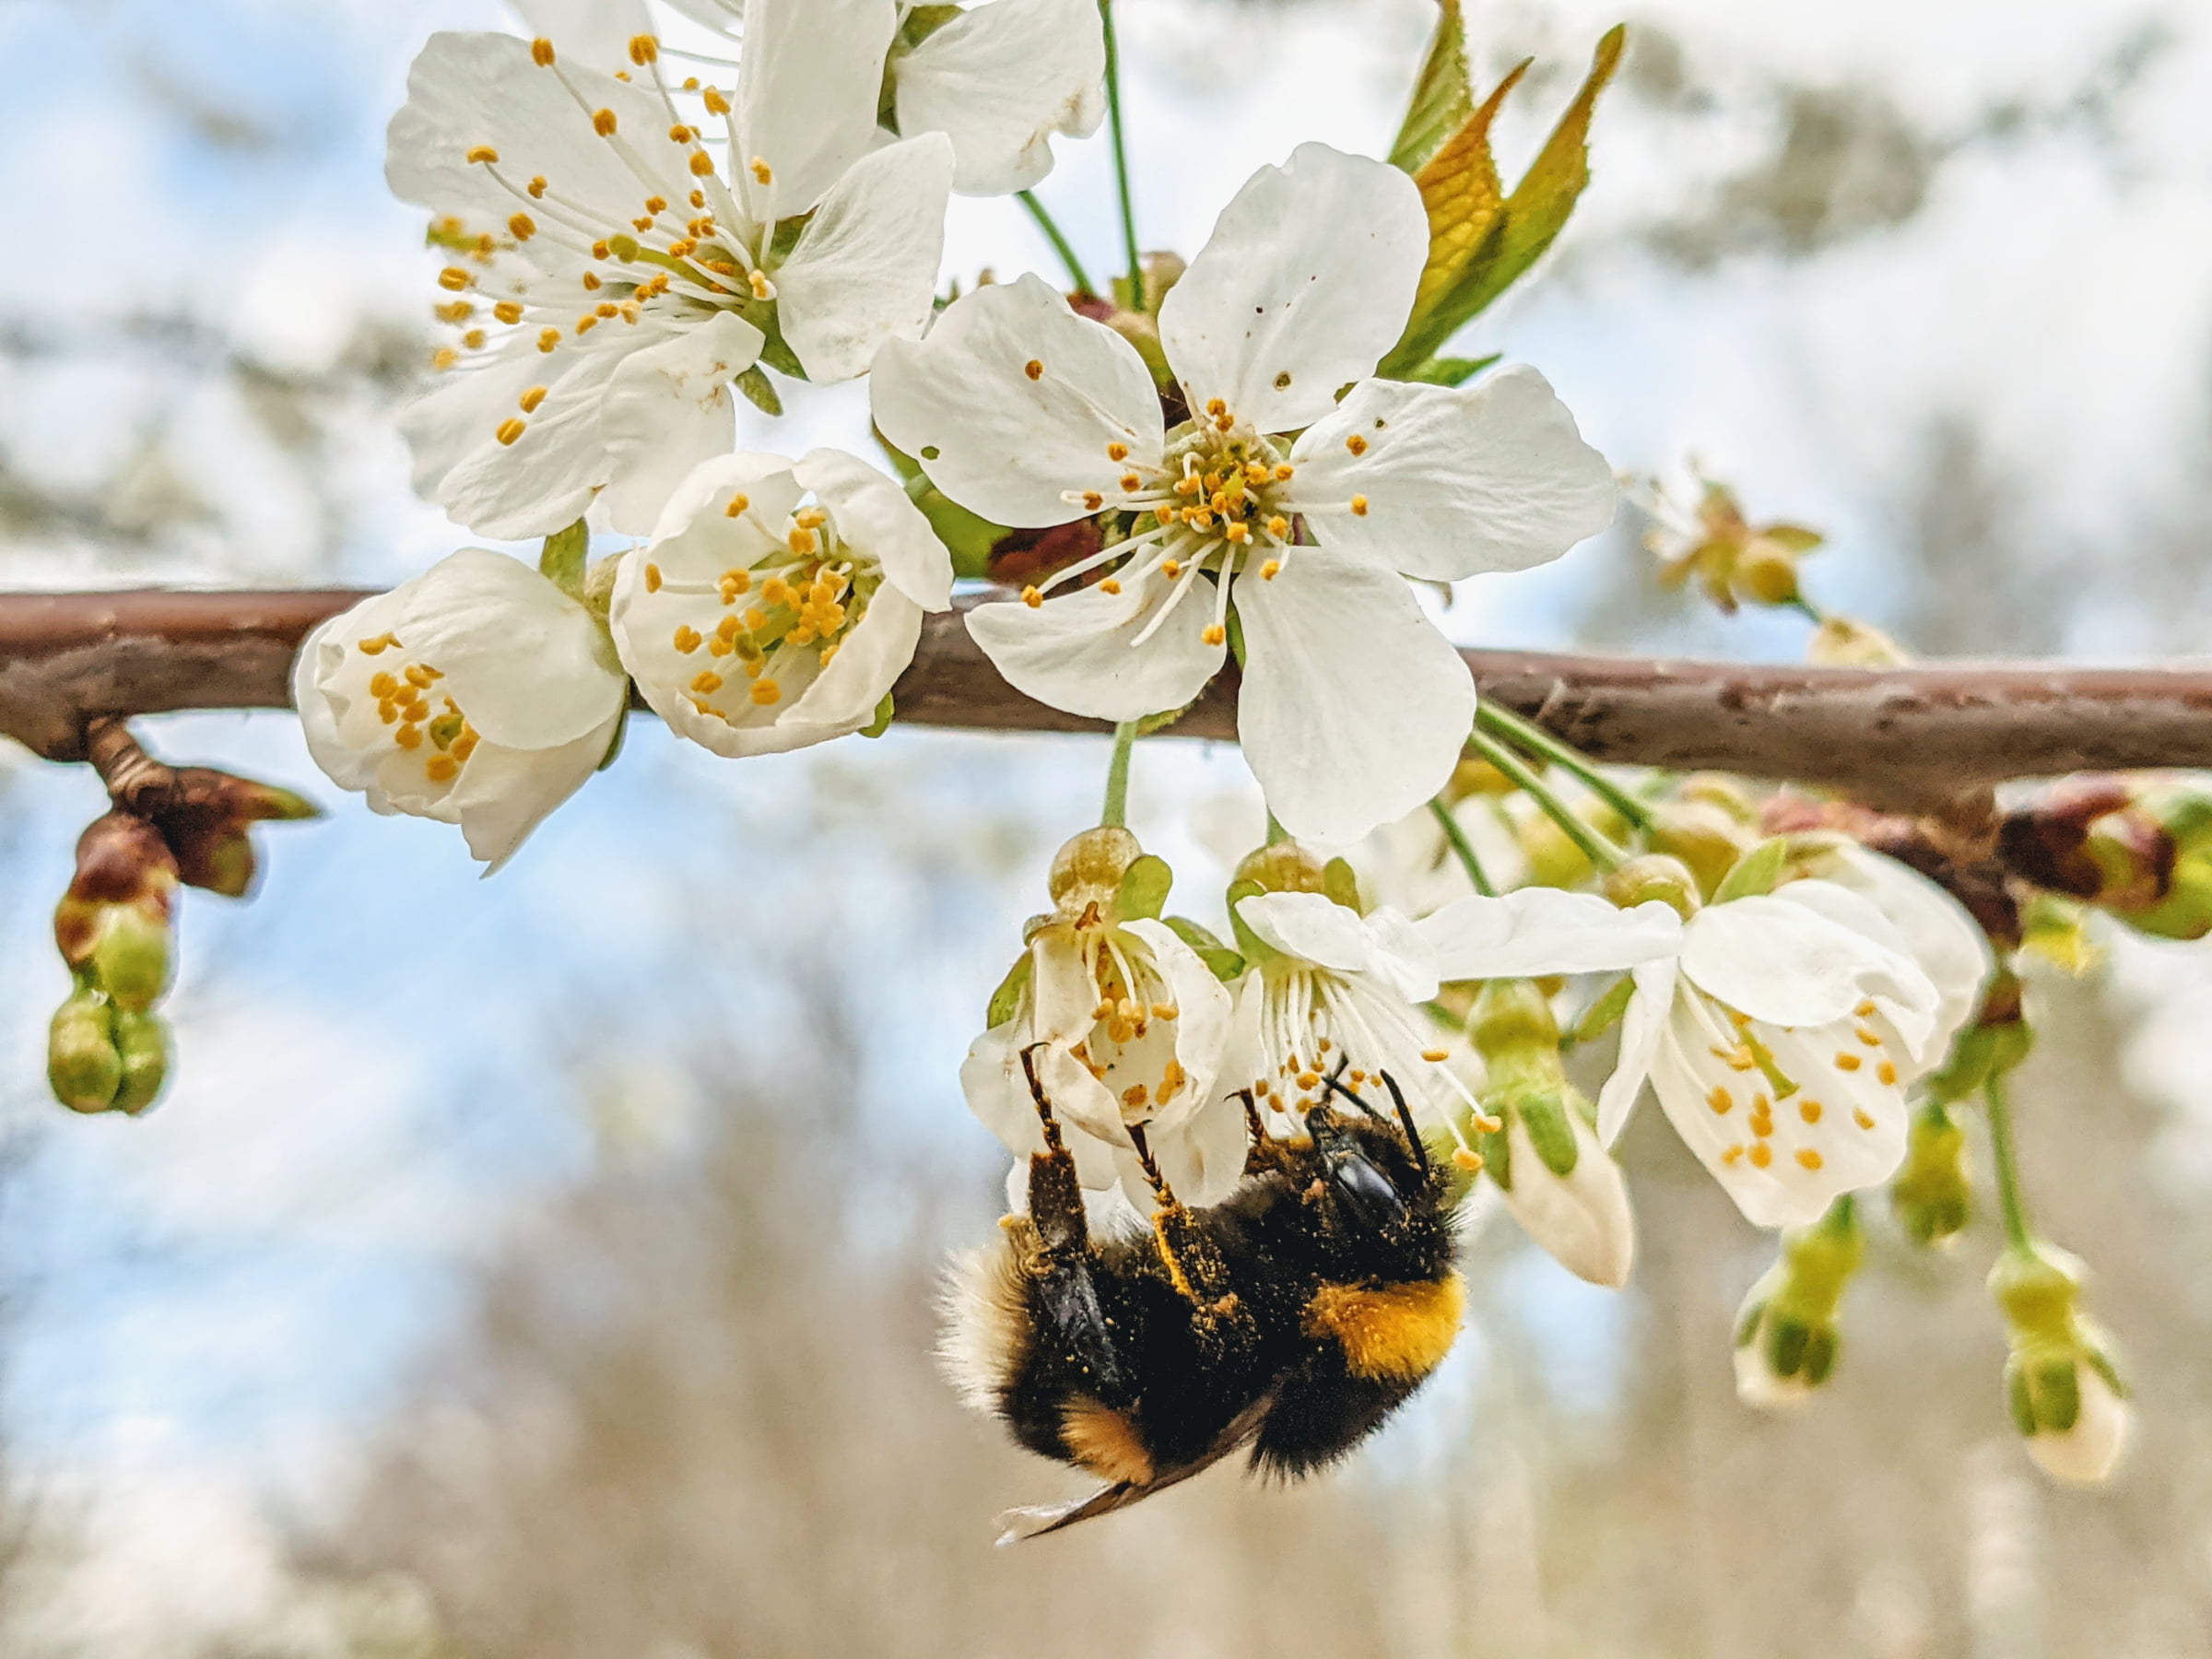 A bumblebee clinging to the underside of some blossoms on a branch.